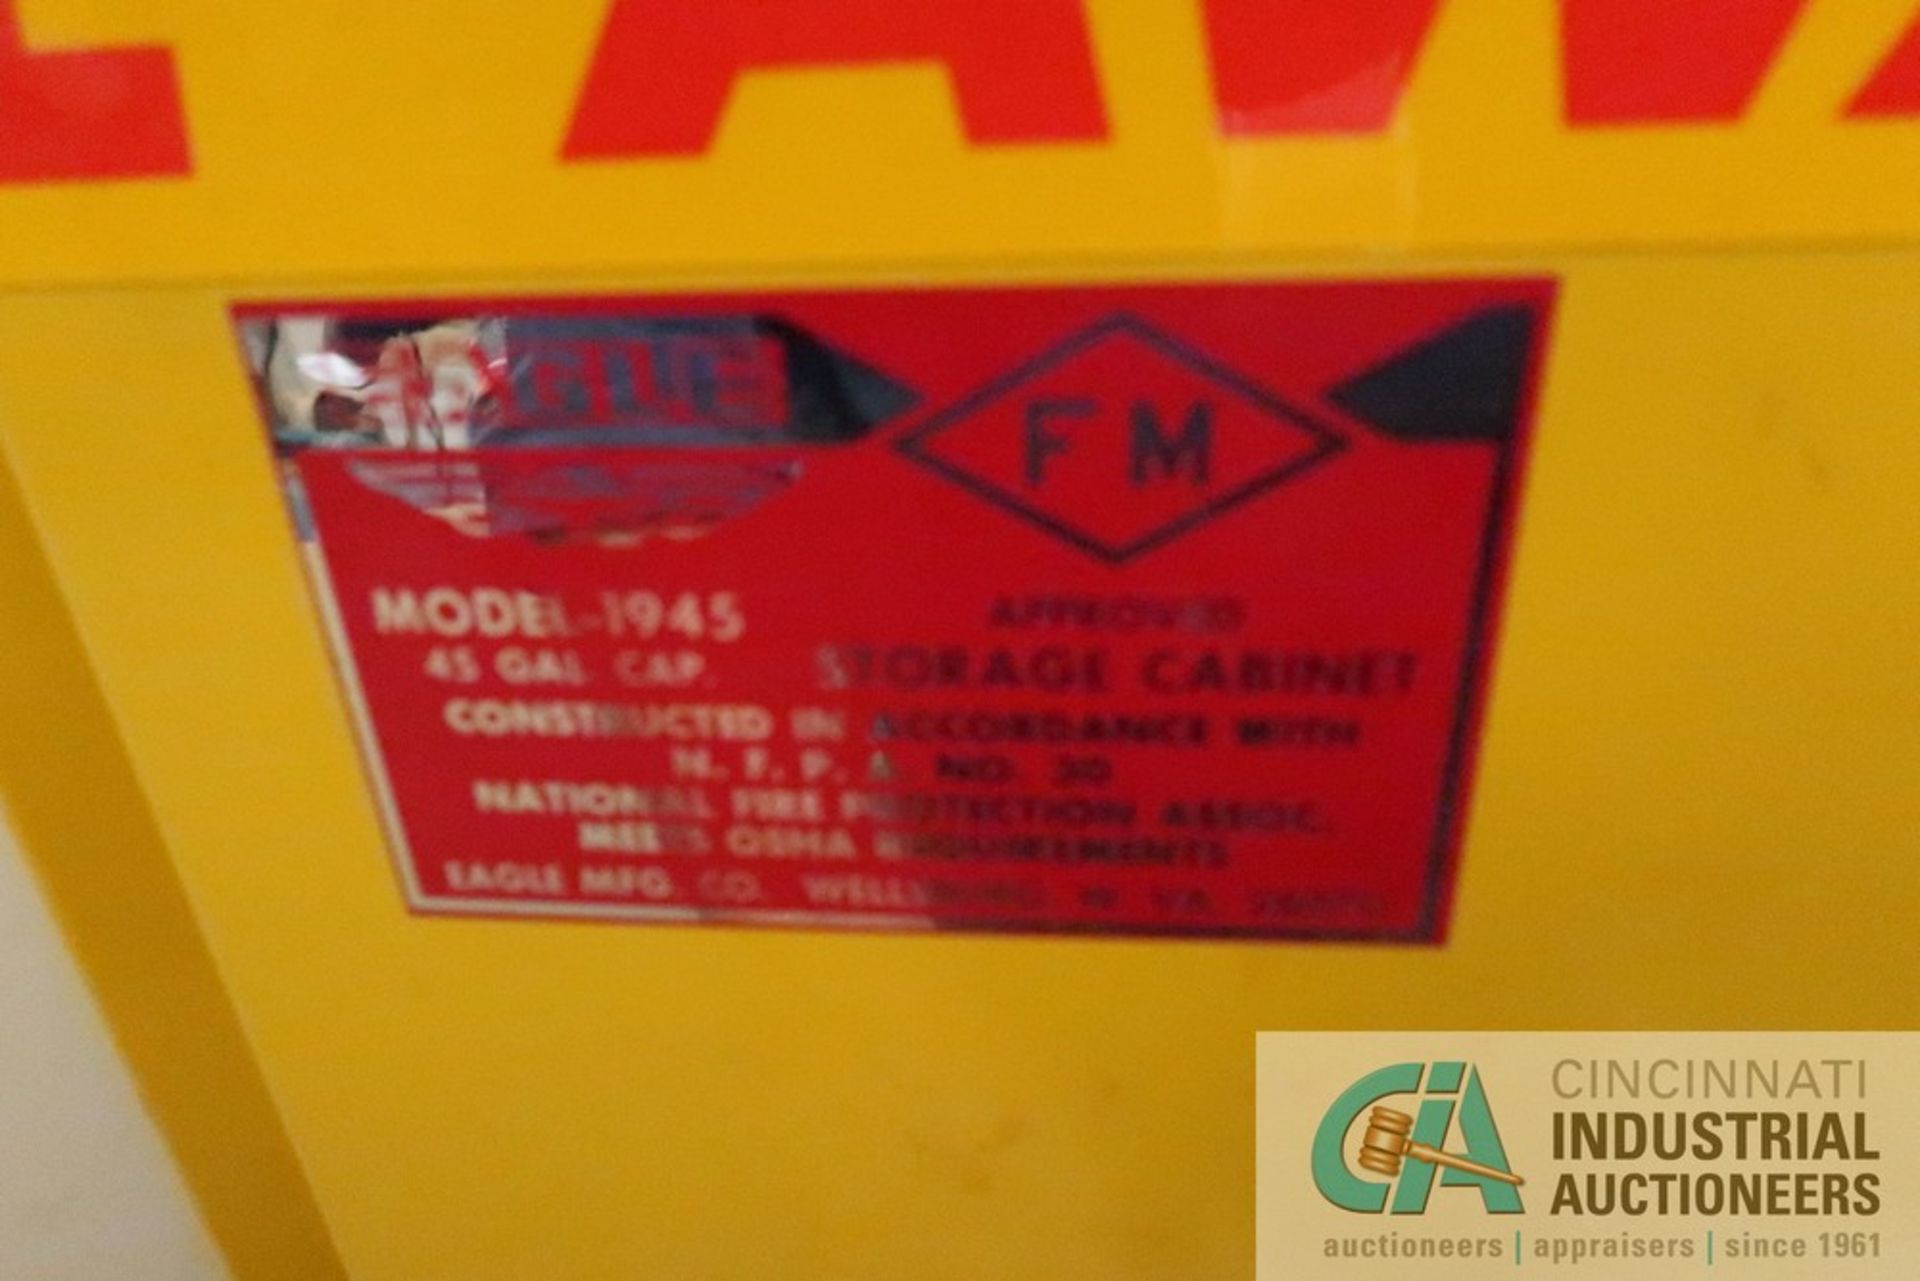 45 GALLON EAGLE MODEL 1945 FLAMMABLE STORAGE CABINET (ROOM 2283B) - Located on 2nd floor - Image 2 of 3